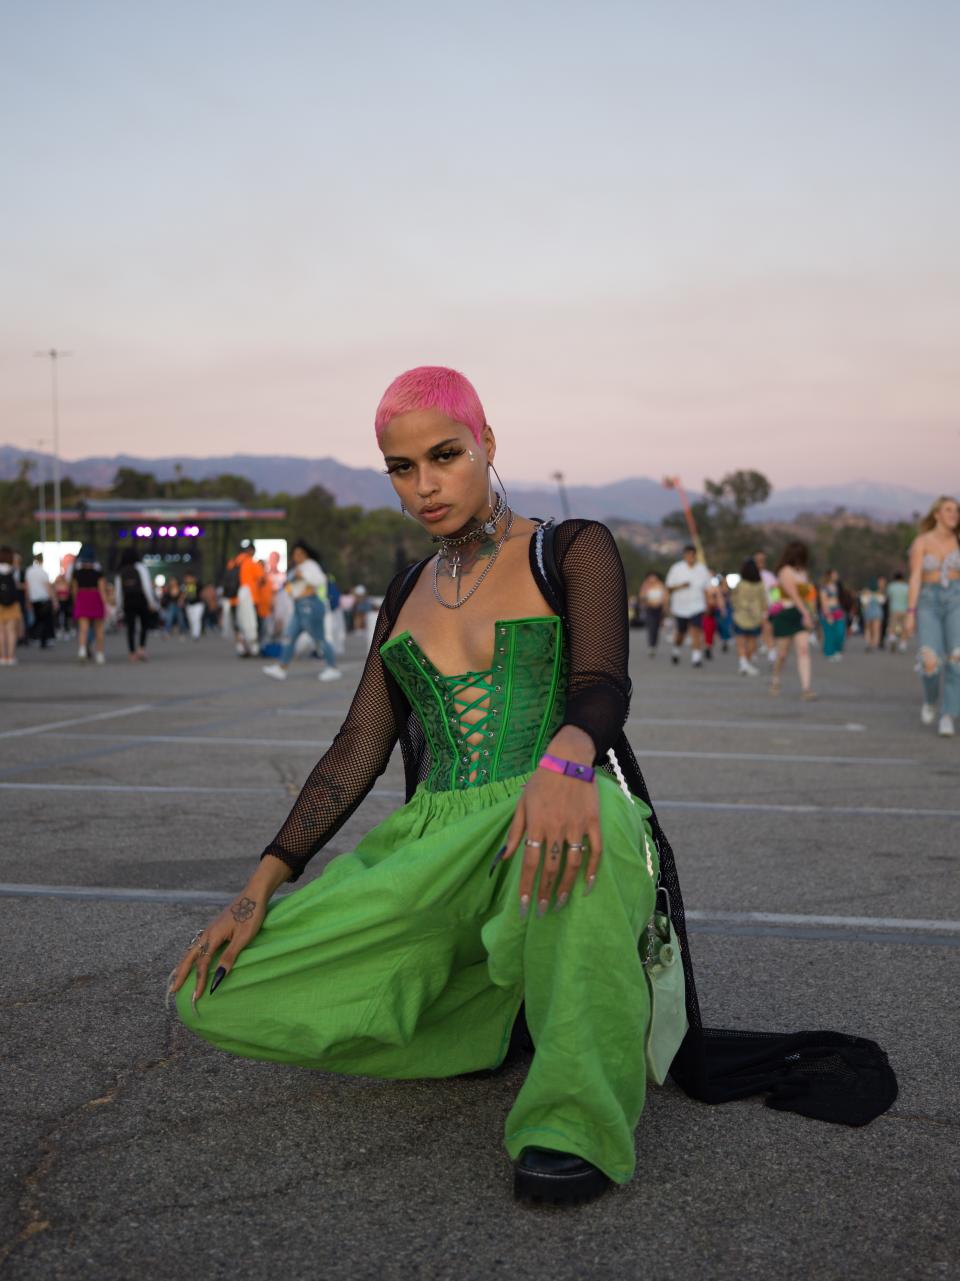 Blü, 24  
@honeybluclue  
“We wanted to have that Cosmo and Wanda vibe; that Blossom and Buttercup feel,” the singer-songwriter says of the look she and her friend Autumn, pictured below, were going for.